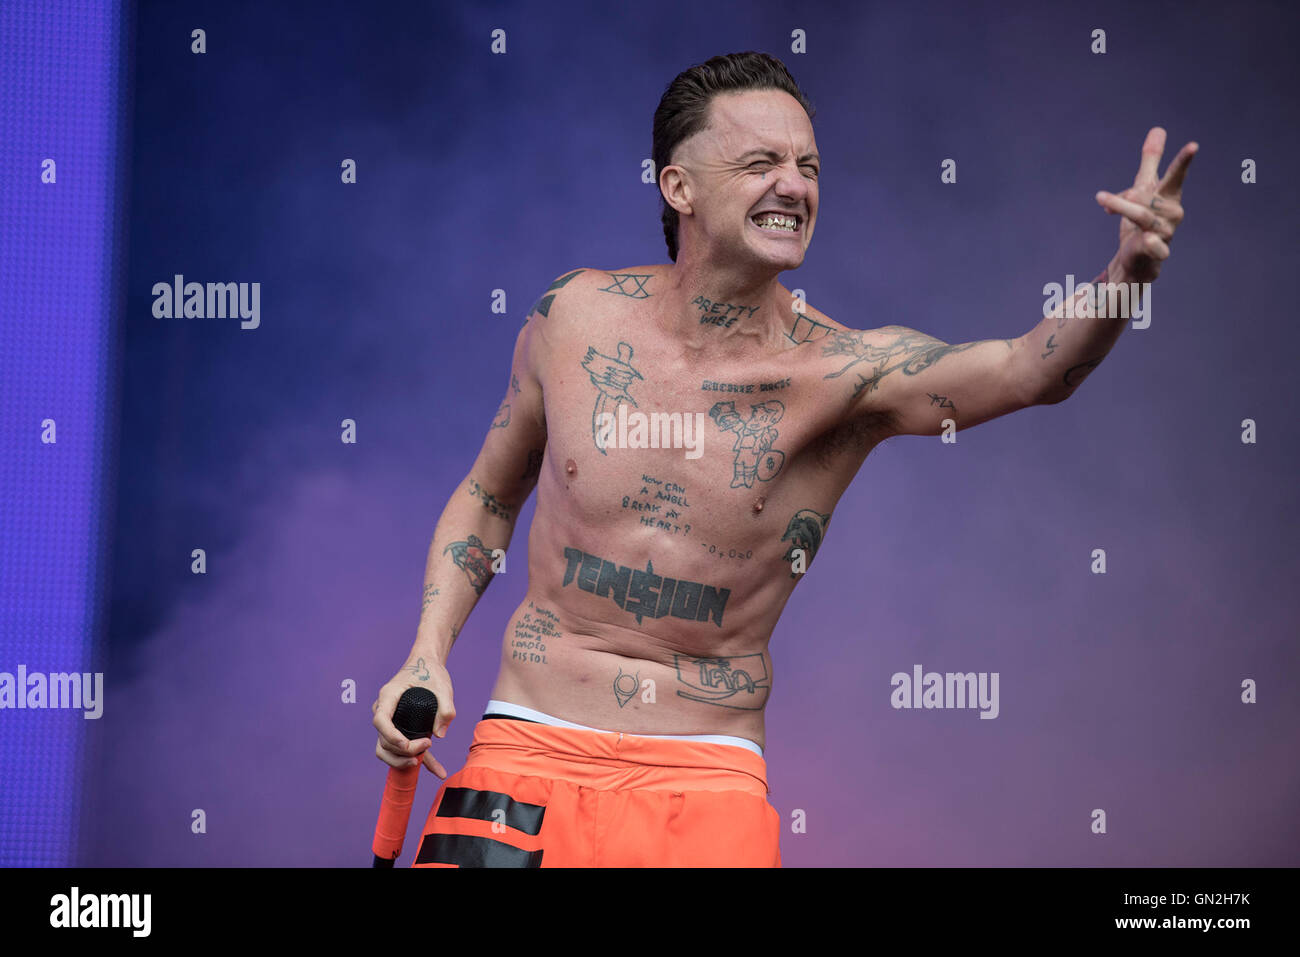 Leeds, UK. 27th August 2016. Yolandi Visser and Watkin Tudor Jones of Die Antwoord perform on the main stage at Leeds Festival 2016, 27/08/2016 Credit:  Gary Mather/Alamy Live News Stock Photo